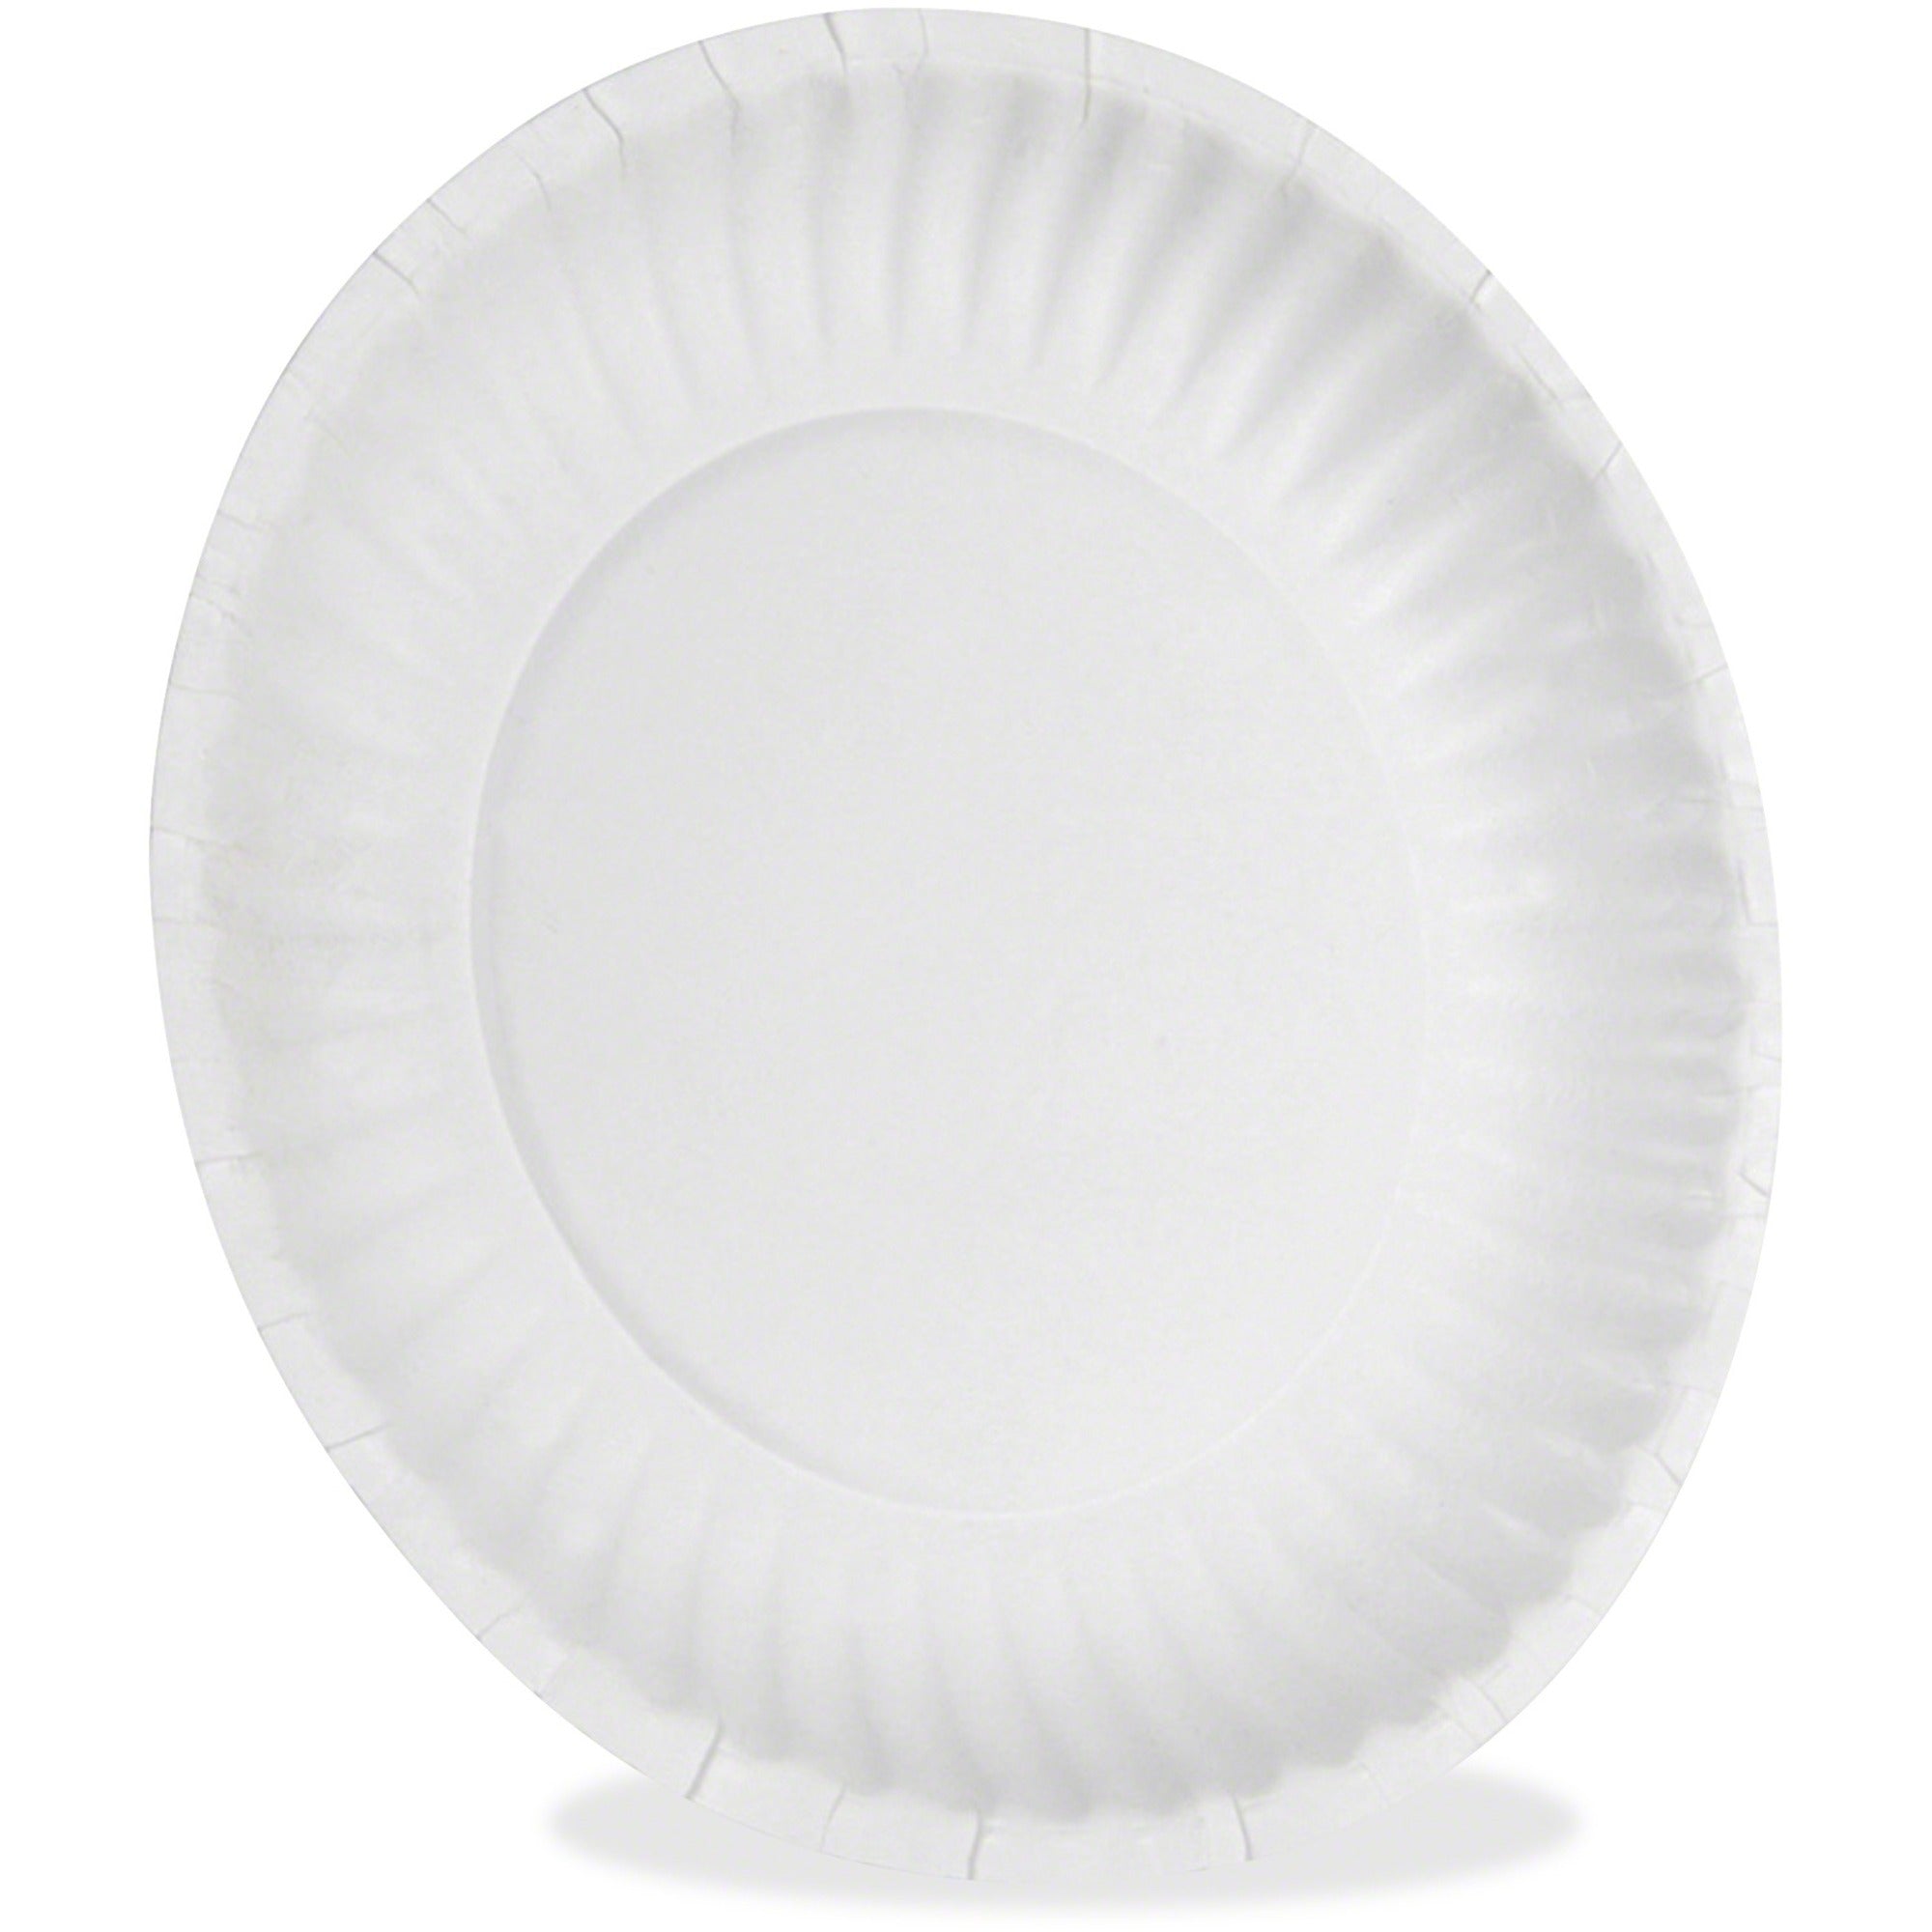 Dixie 6" Uncoated Paper Plates by GP Pro - 500 / Pack - White - 2 / Carton - 